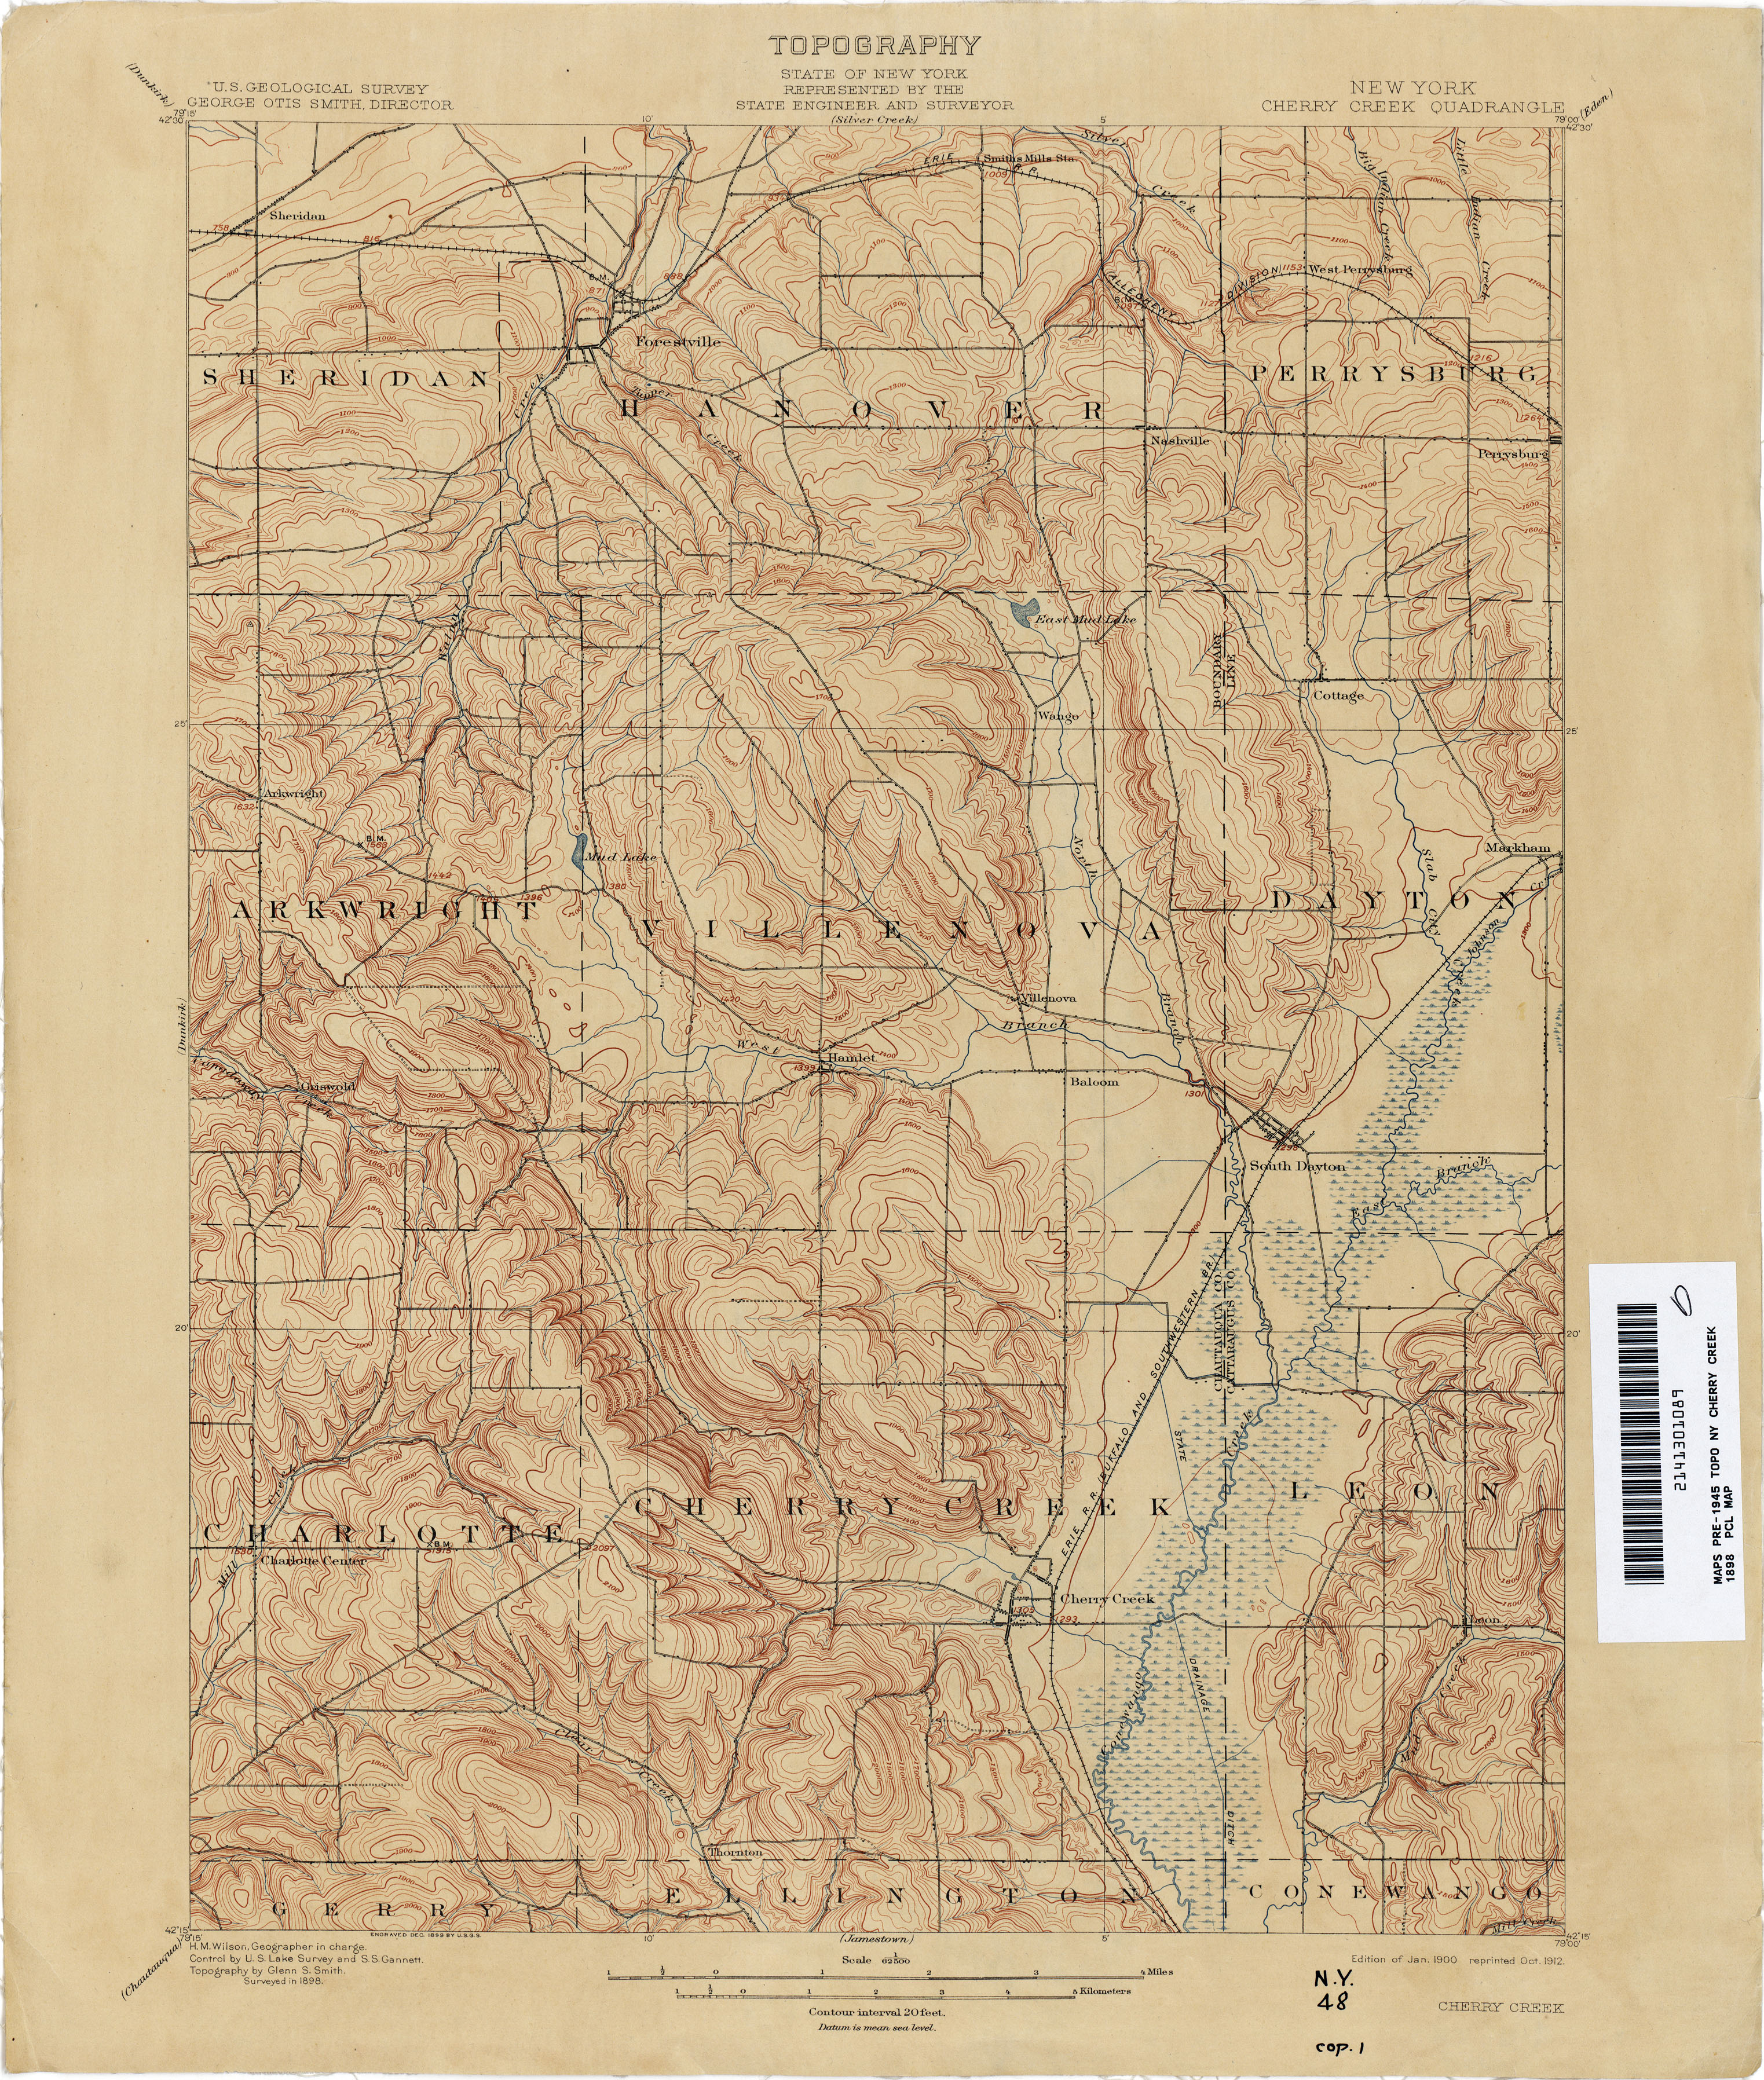 Dunkirk, NY (1900, 62500-Scale) Map by United States Geological Survey